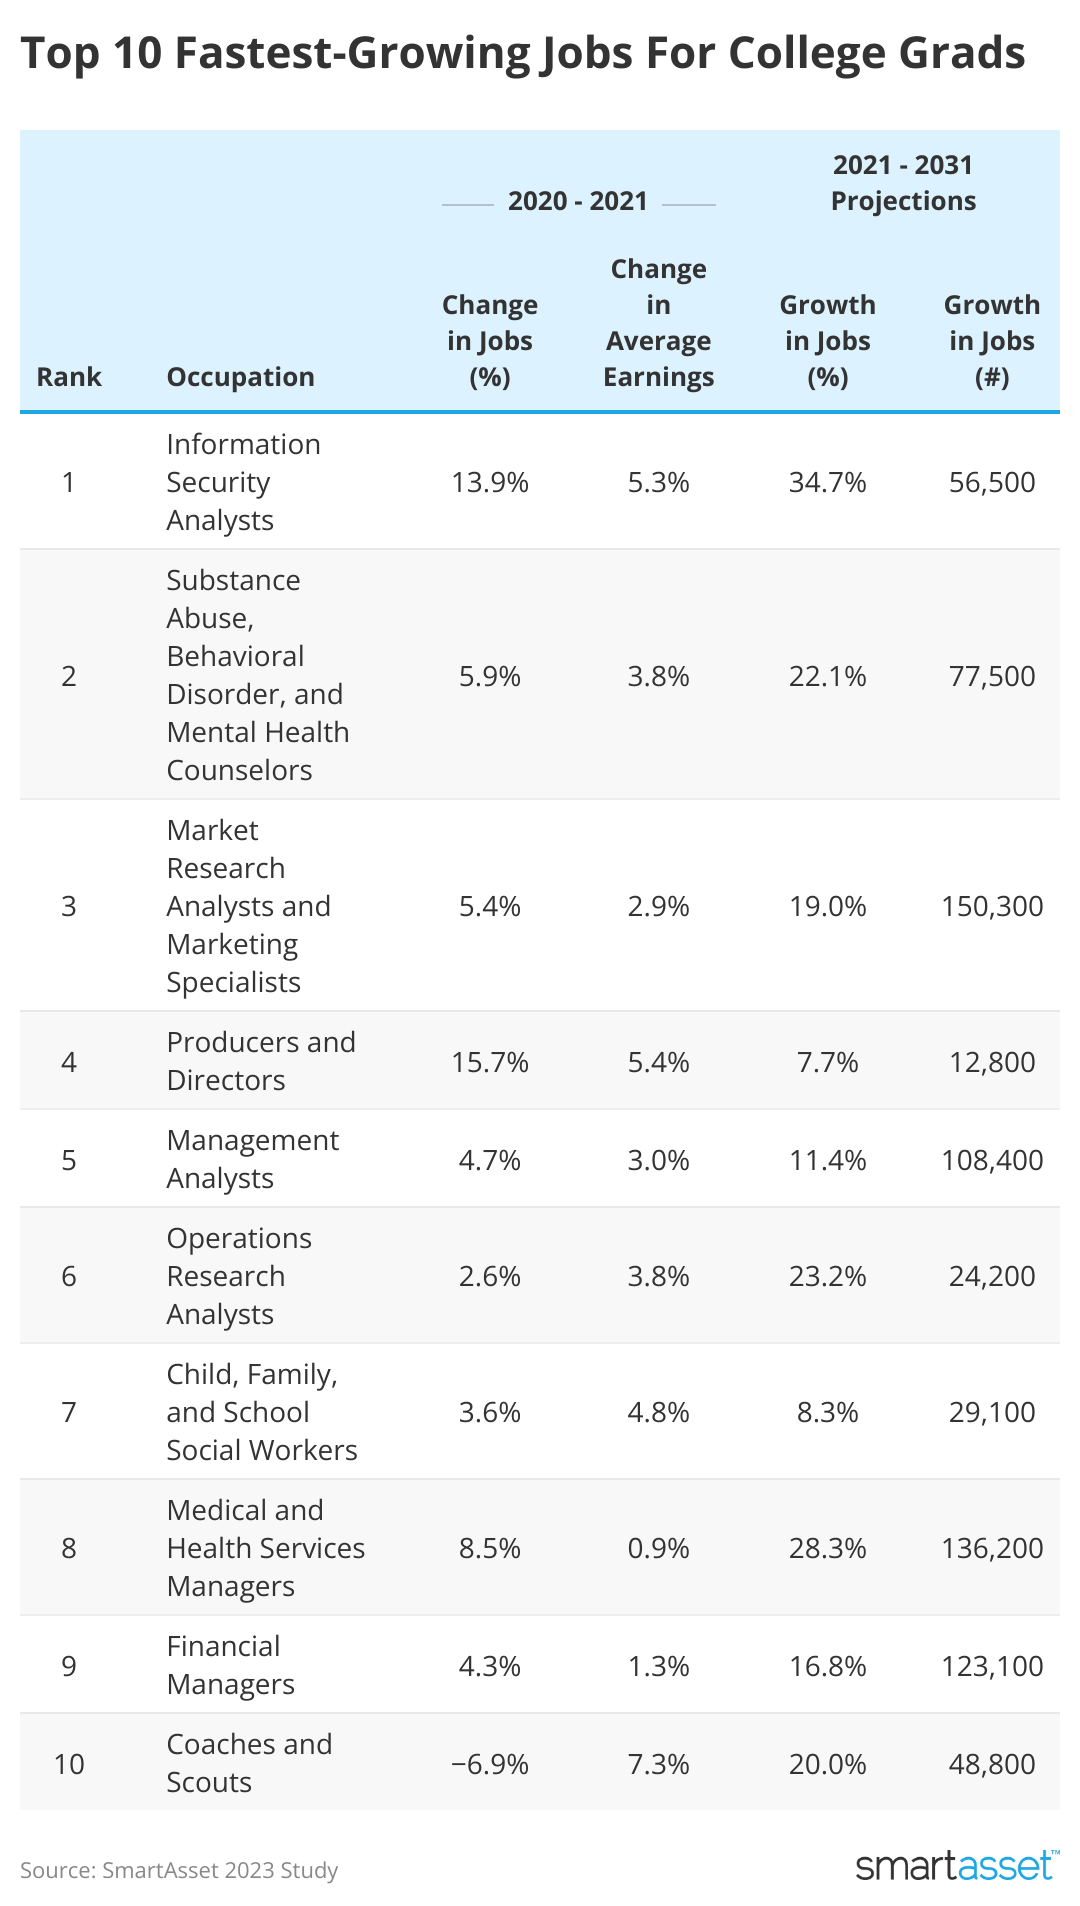 Table Top 10 Fastest Growing Jobs For College Grads 0